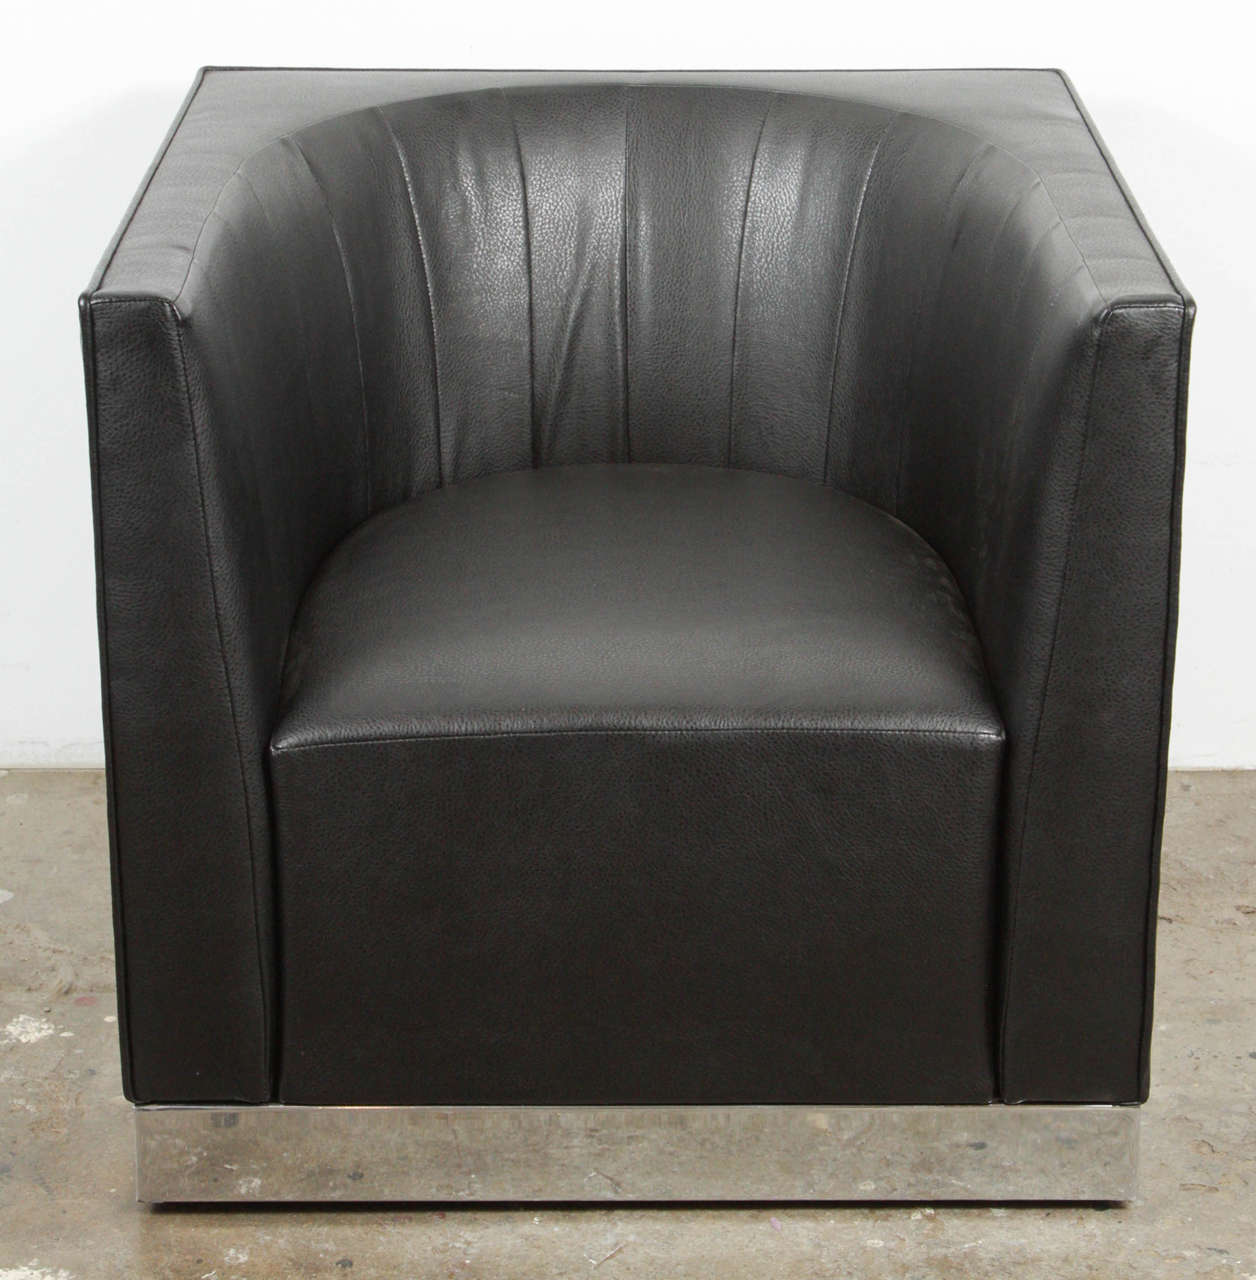 Vintage black leather and chrome base designer club chair in excellent condition. Attributed to Milo Baughman. Has a deco modern look. Heavy chairs, very high quality. Buy individually or up to six in total. Great lines, fantastic design.